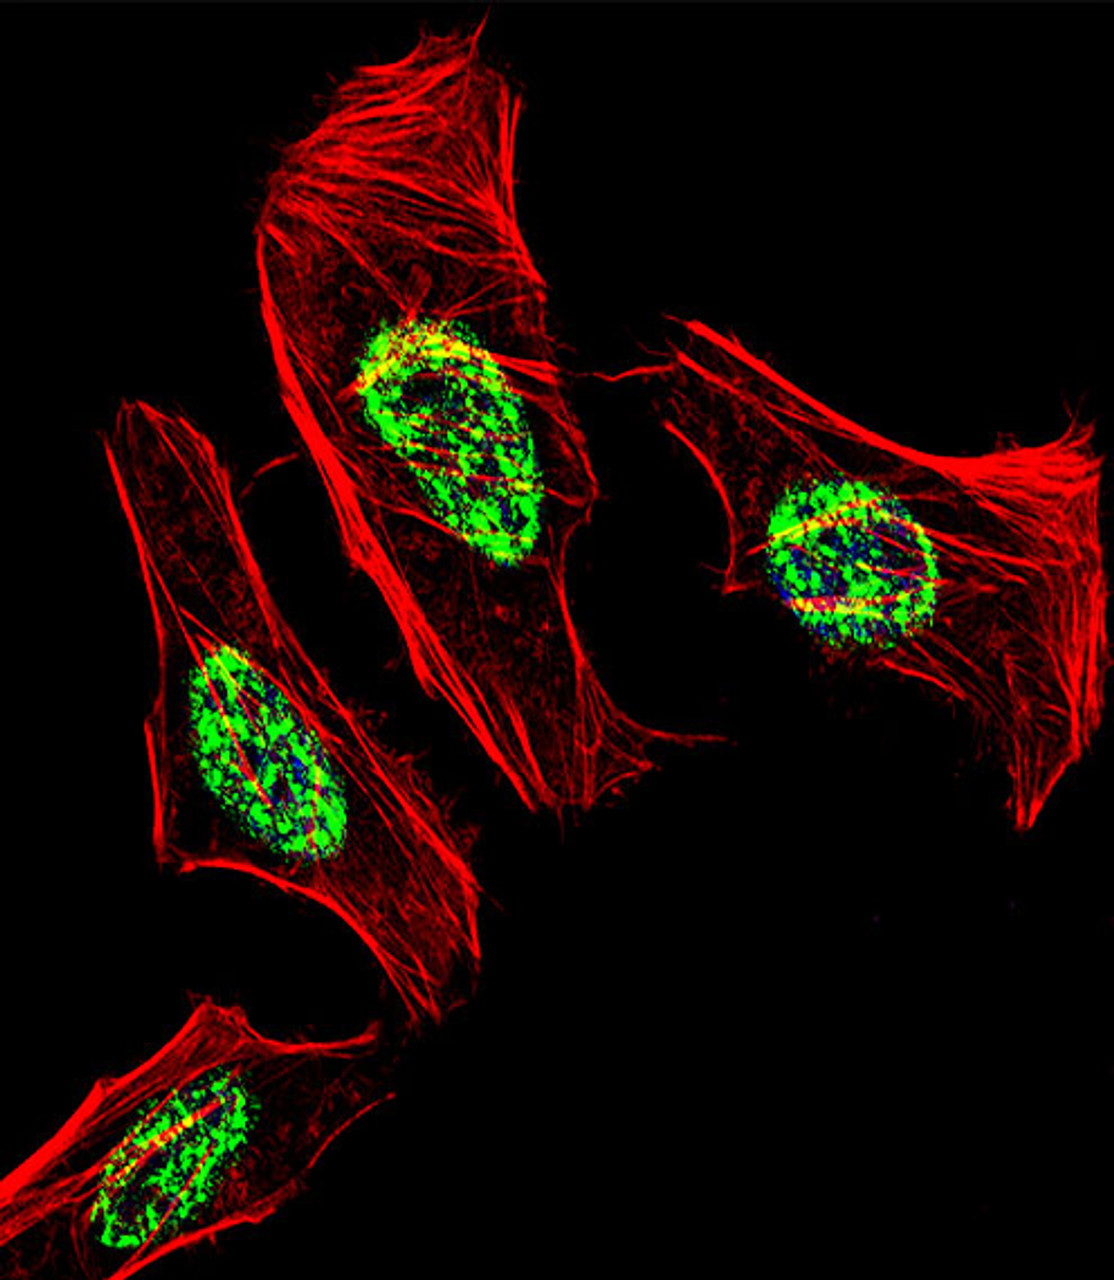 Fluorescent confocal image of Hela cell stained with NR2C2 Antibody .Hela cells were fixed with 4% PFA (20 min) , permeabilized with Triton X-100 (0.1%, 10 min) , then incubated with NR2C2 primary antibody (1:25) . For secondary antibody, Alexa Fluor 488 conjugated donkey anti-rabbit antibody (green) was used (1:400) .Cytoplasmic actin was counterstained with Alexa Fluor 555 (red) conjugated Phalloidin (7units/ml) . Nuclei were counterstained with DAPI (blue) (10 ug/ml, 10 min) . NR2C2 immunoreactivity is localized to Nucleus significantly.